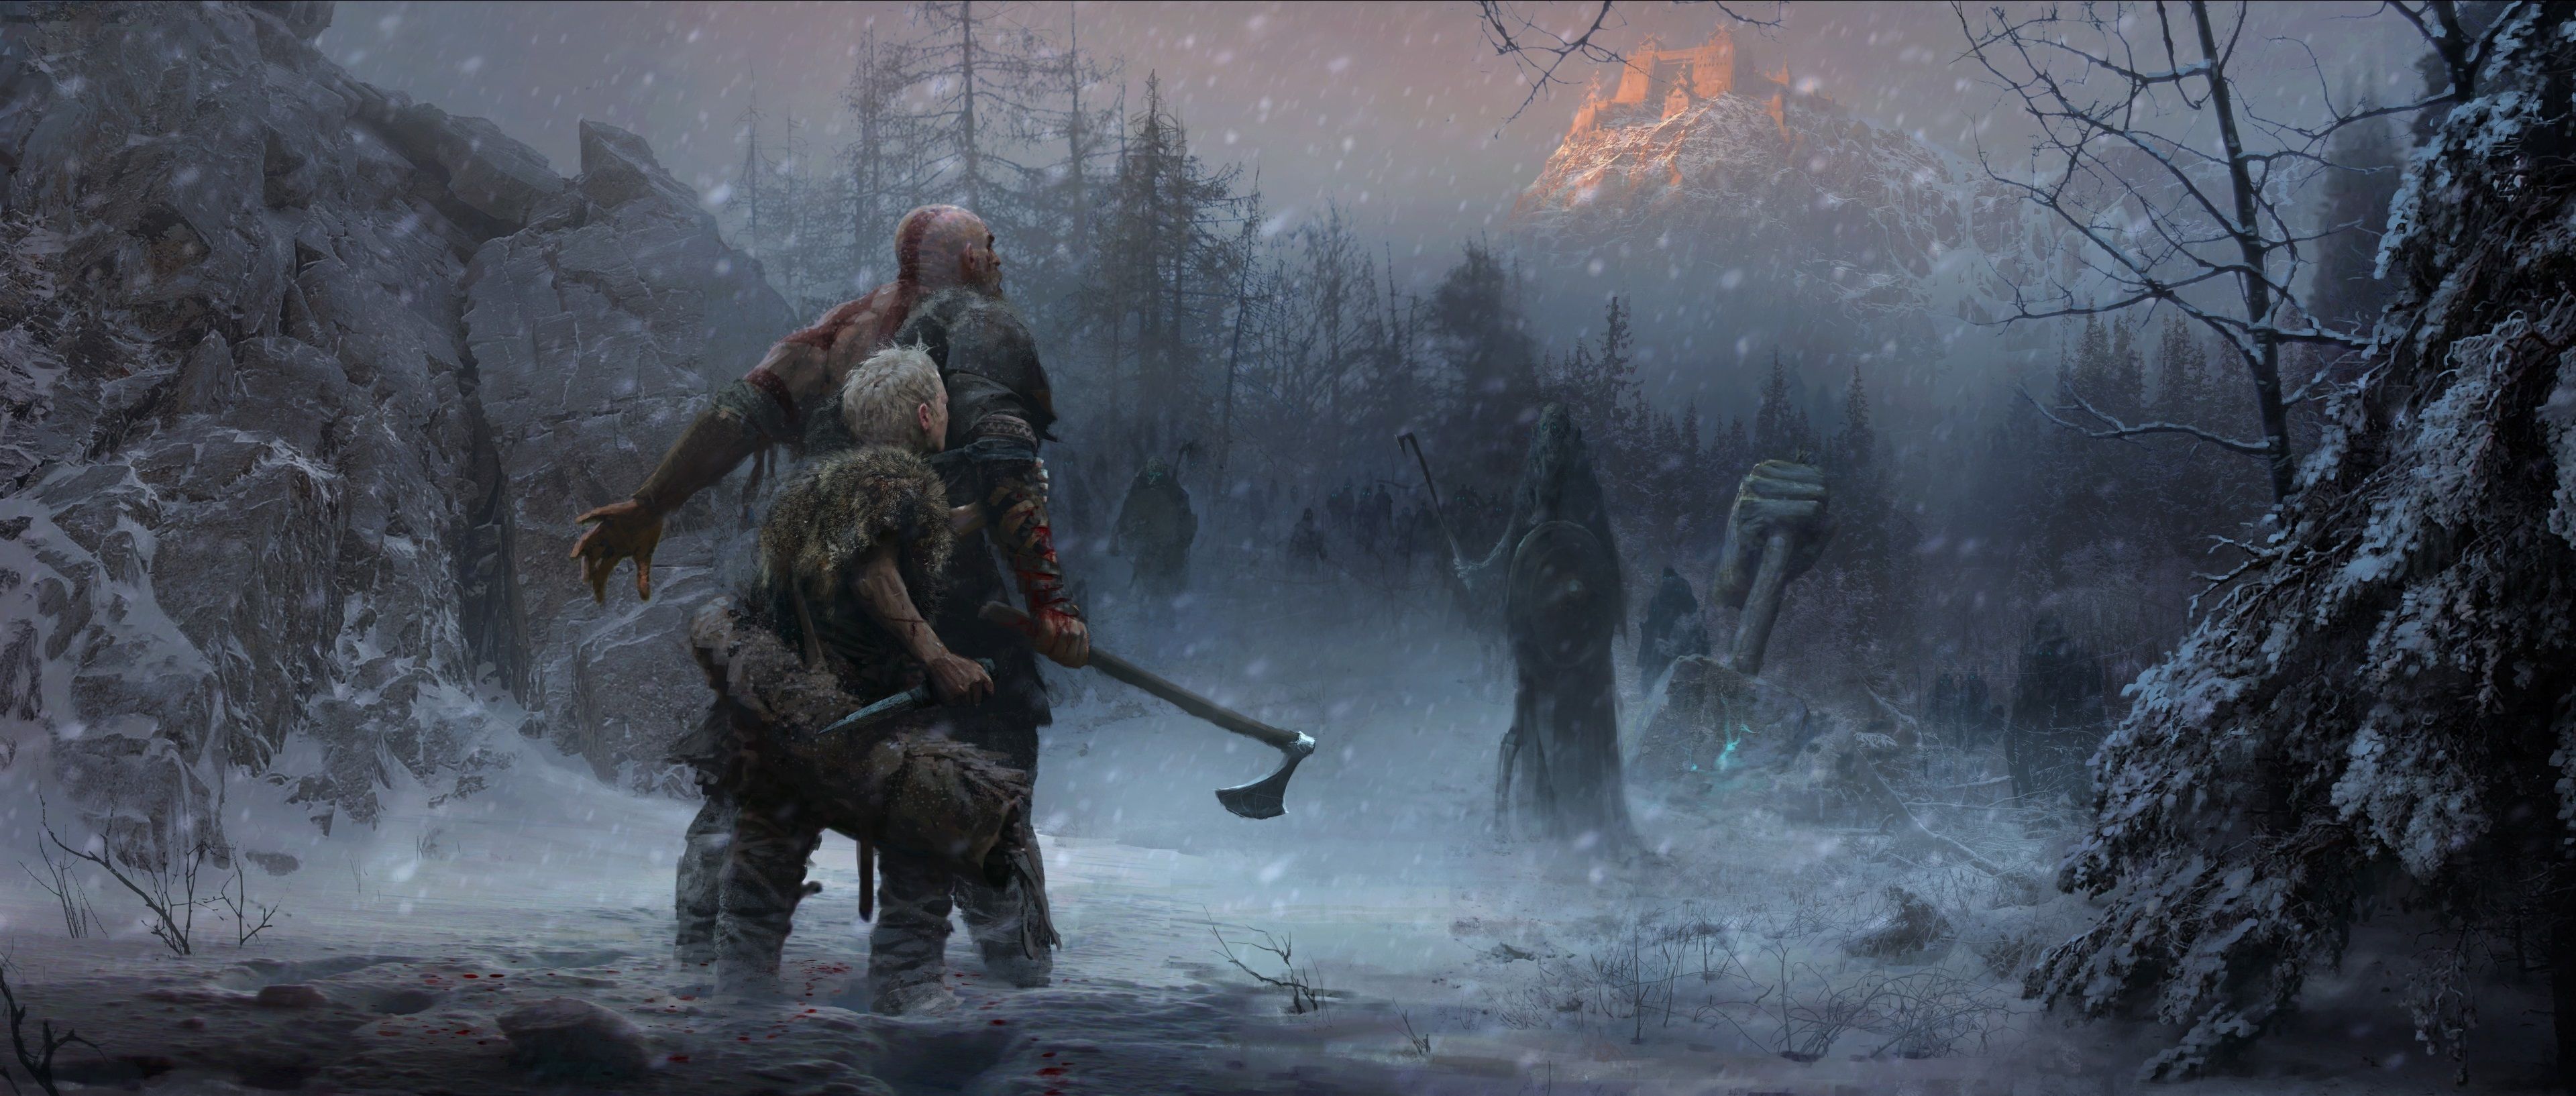 Free Download God Of War Wallpaper For PC